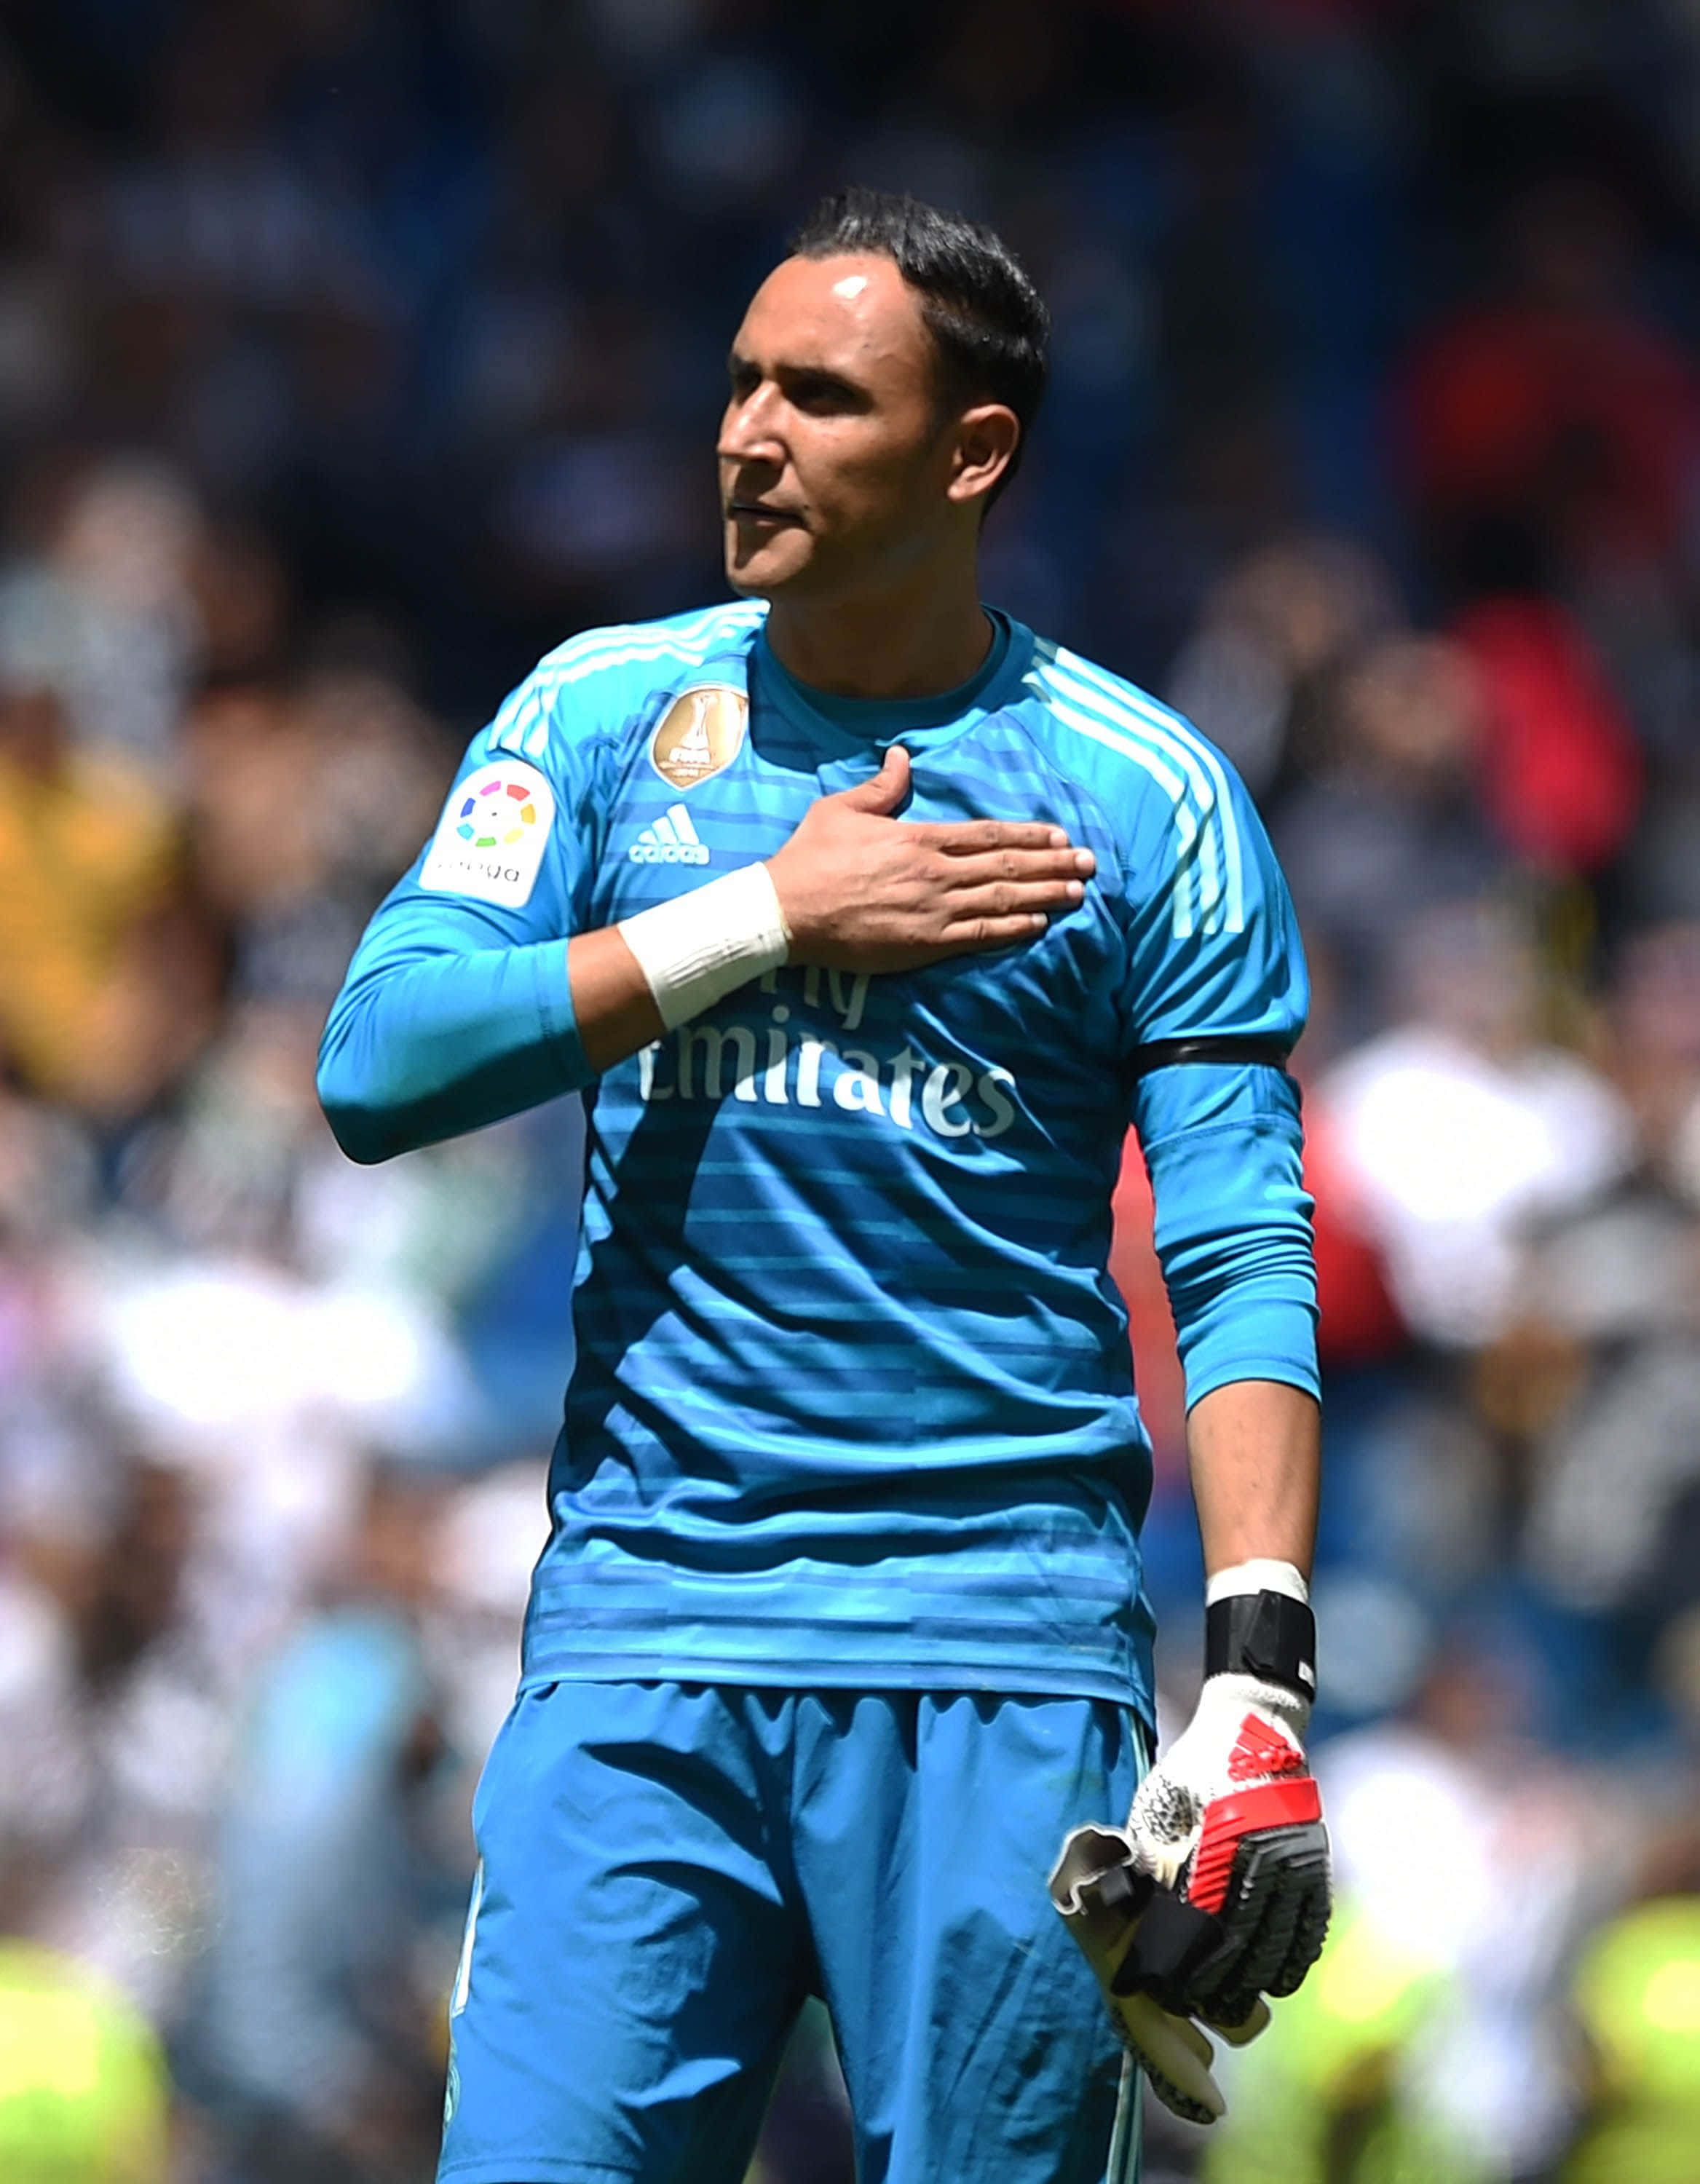 Keylor Navas in action during a soccer match Wallpaper